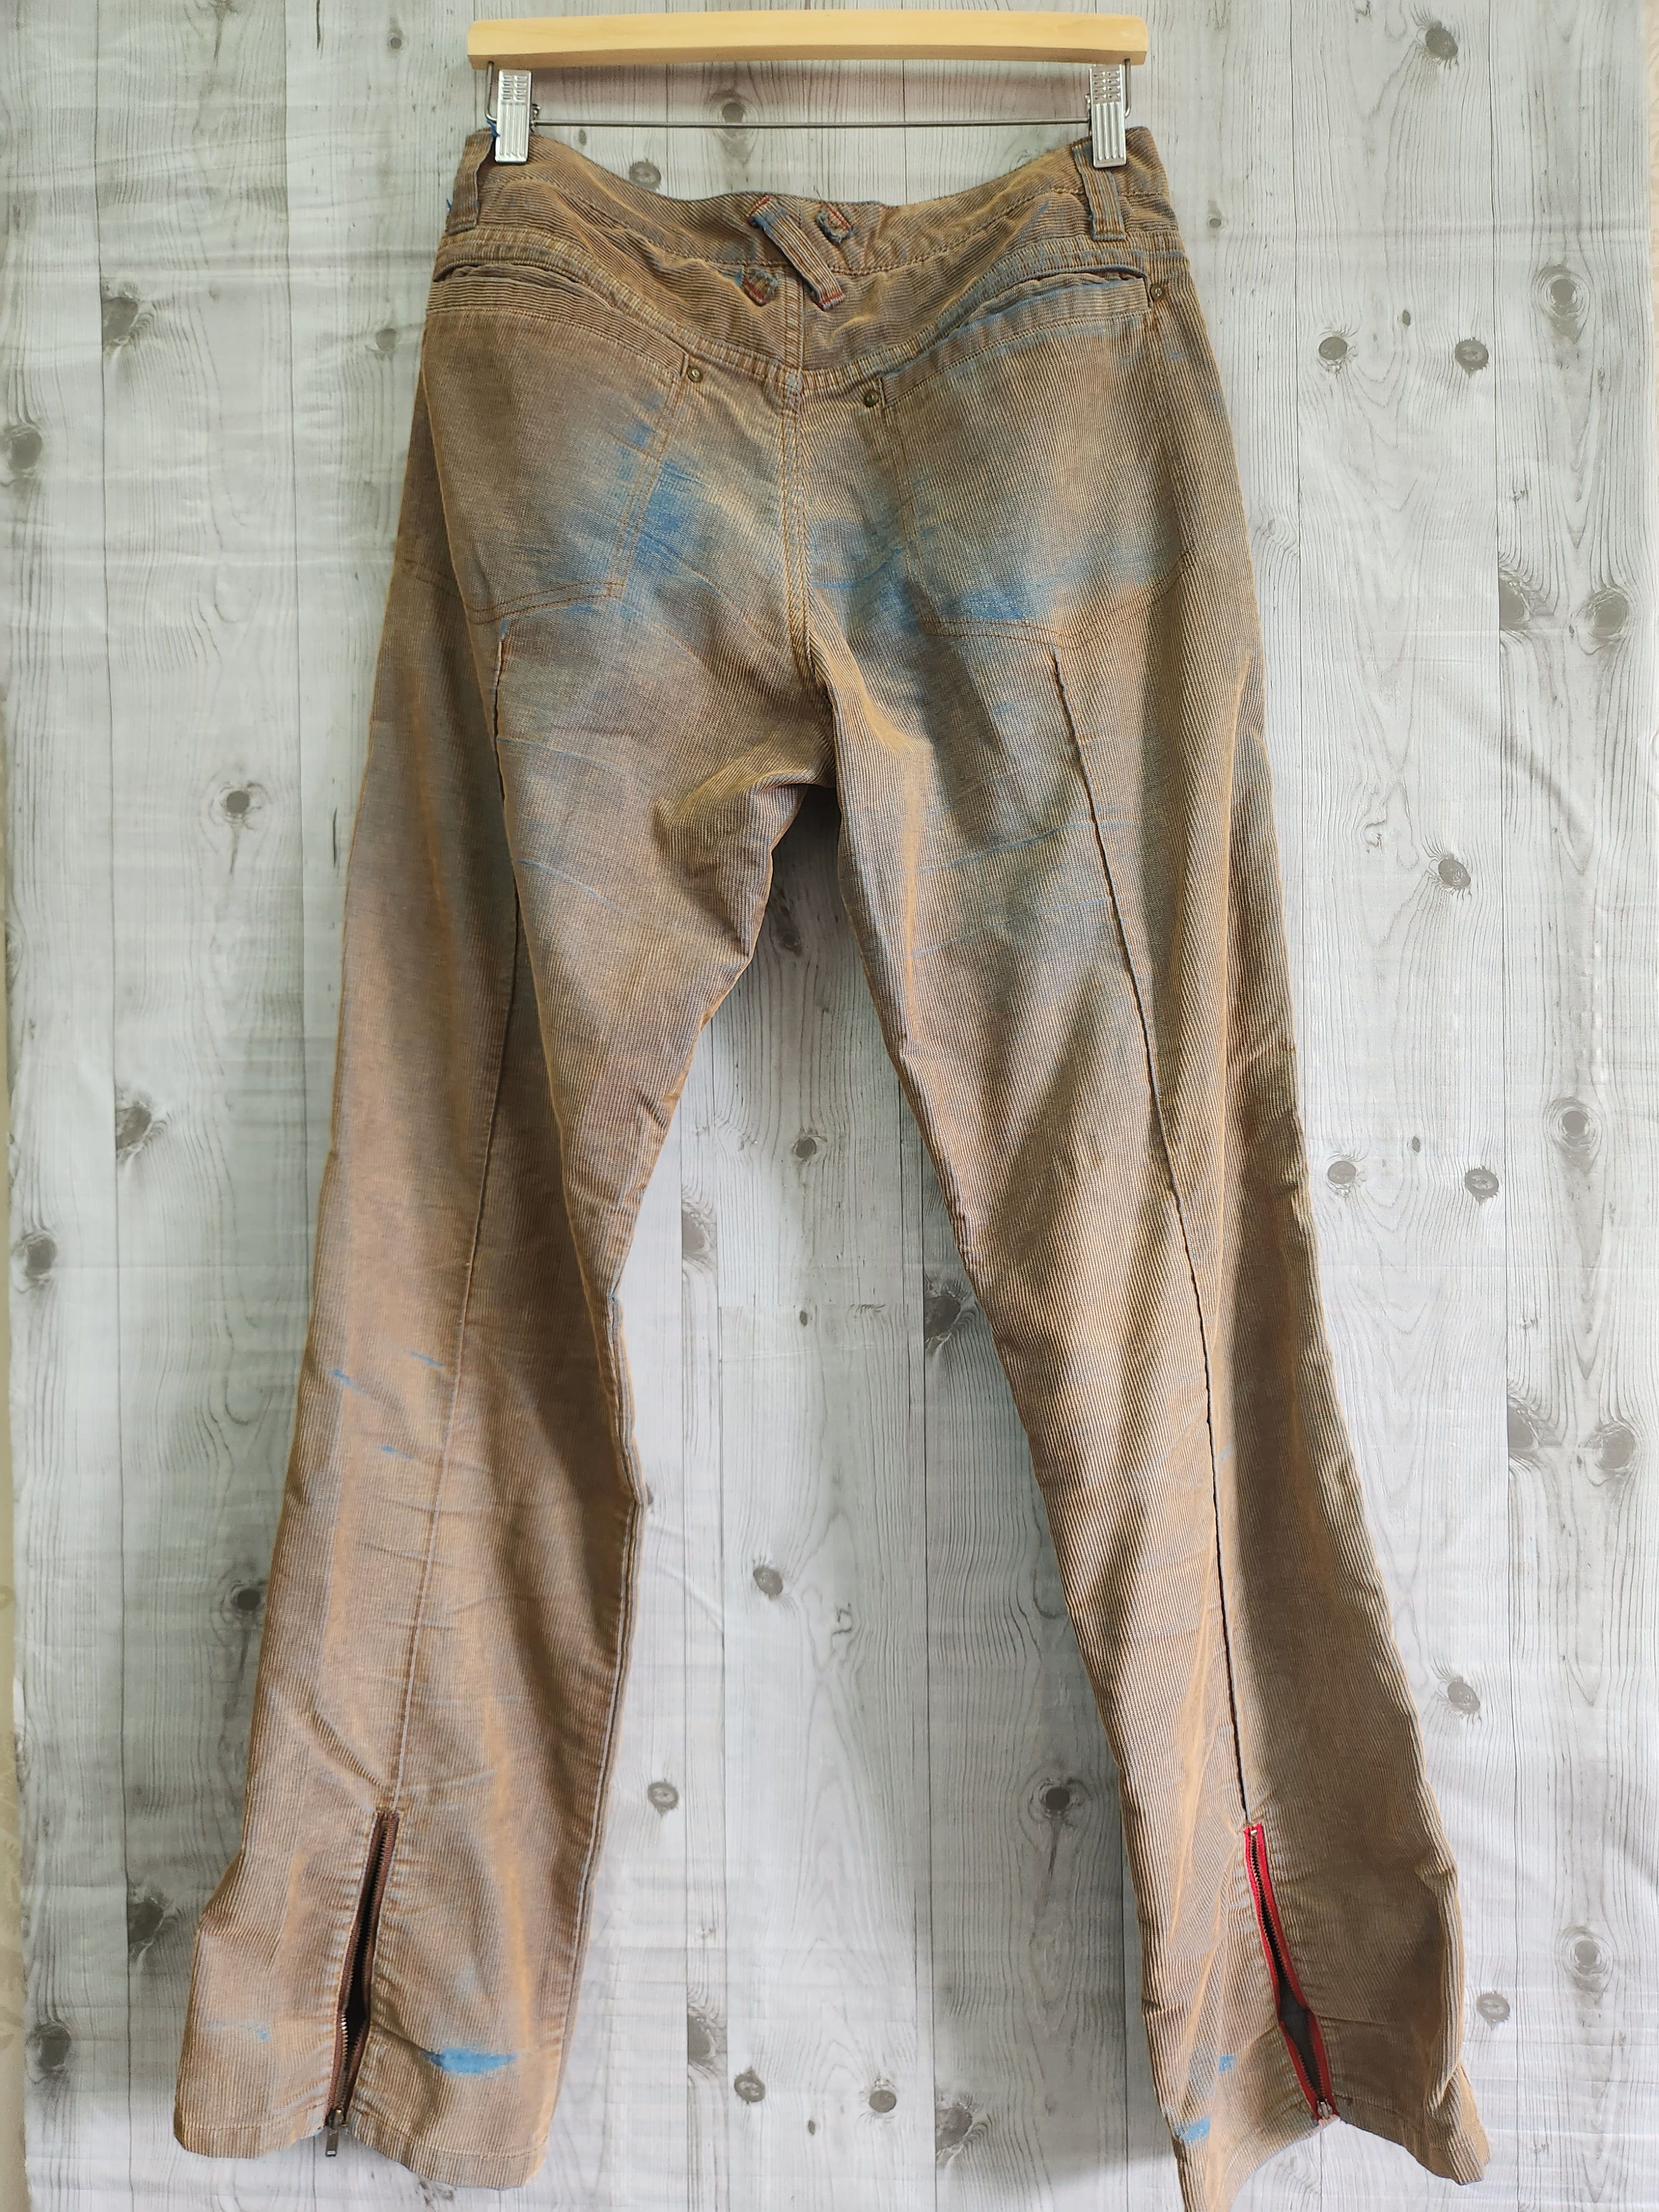 Key Acquisitions - Acquiesce Distressed Faded Bluish Denim Jeans Japanese - 19